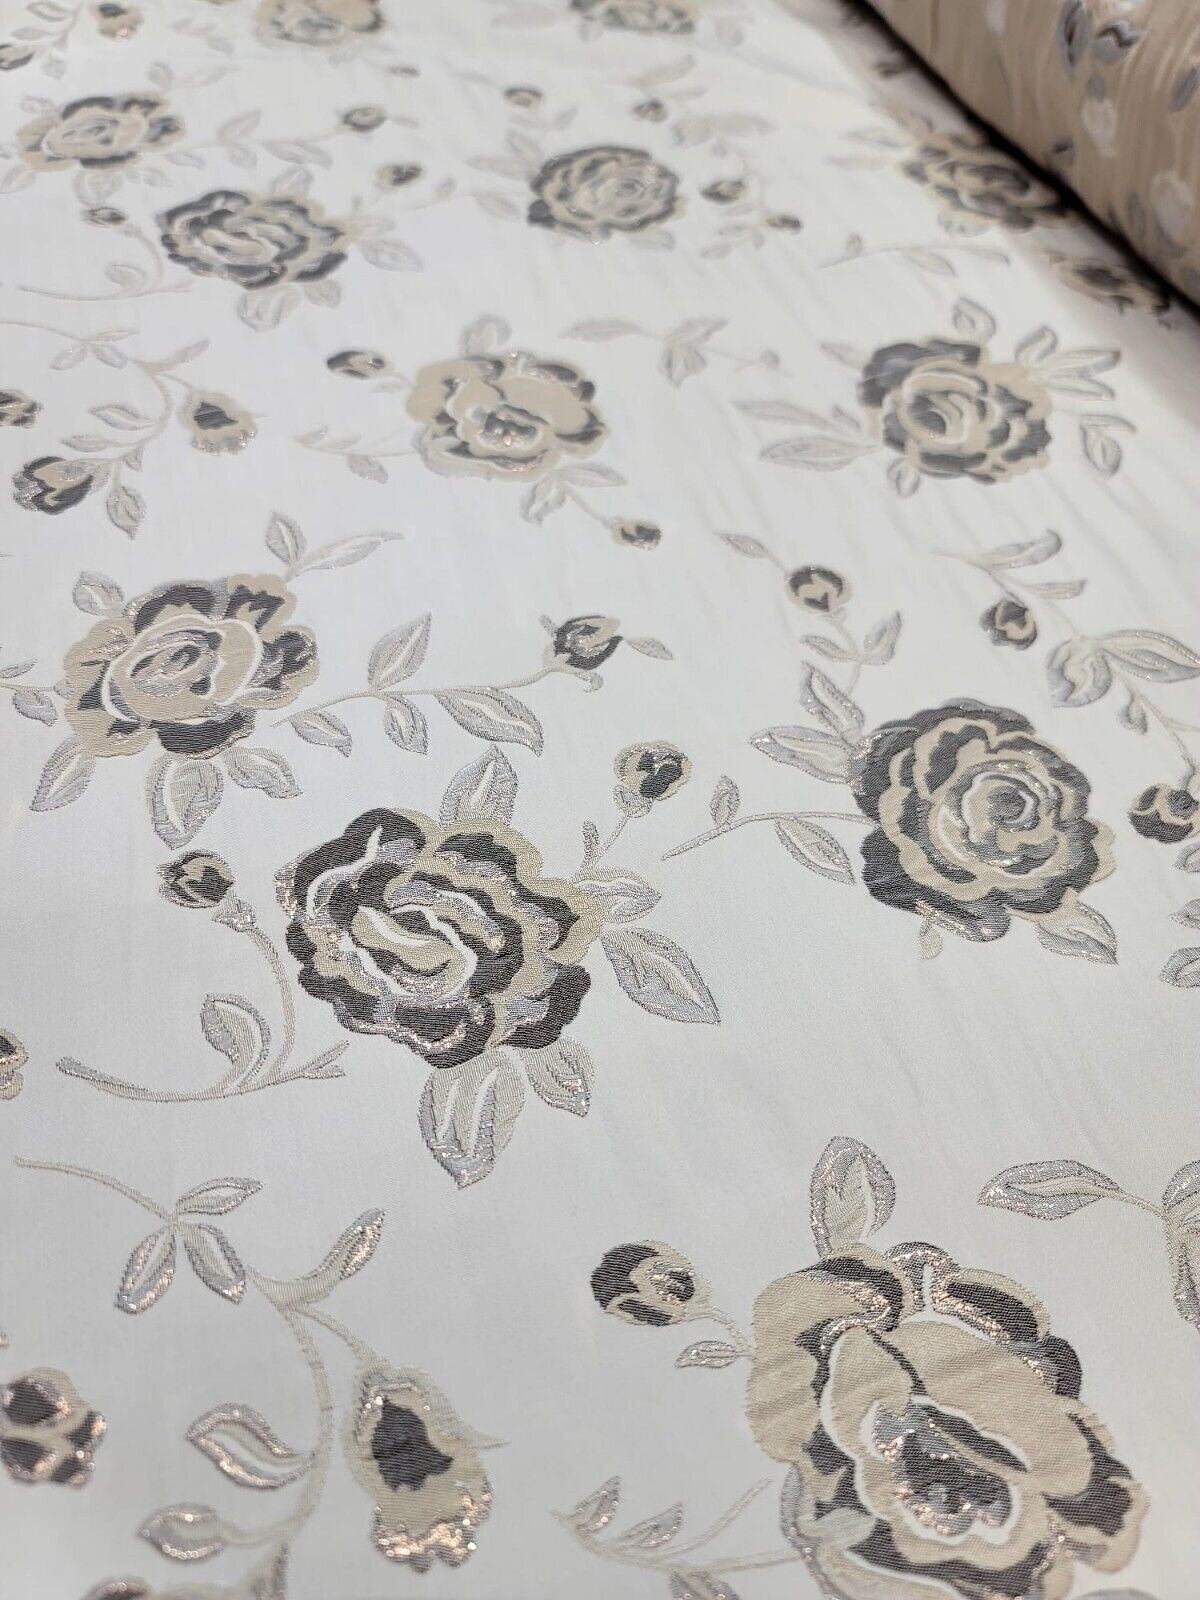 BEIGE GOLD Floral Brocade Fabric (60 in.) Sold By The Yard Embossed Flowers